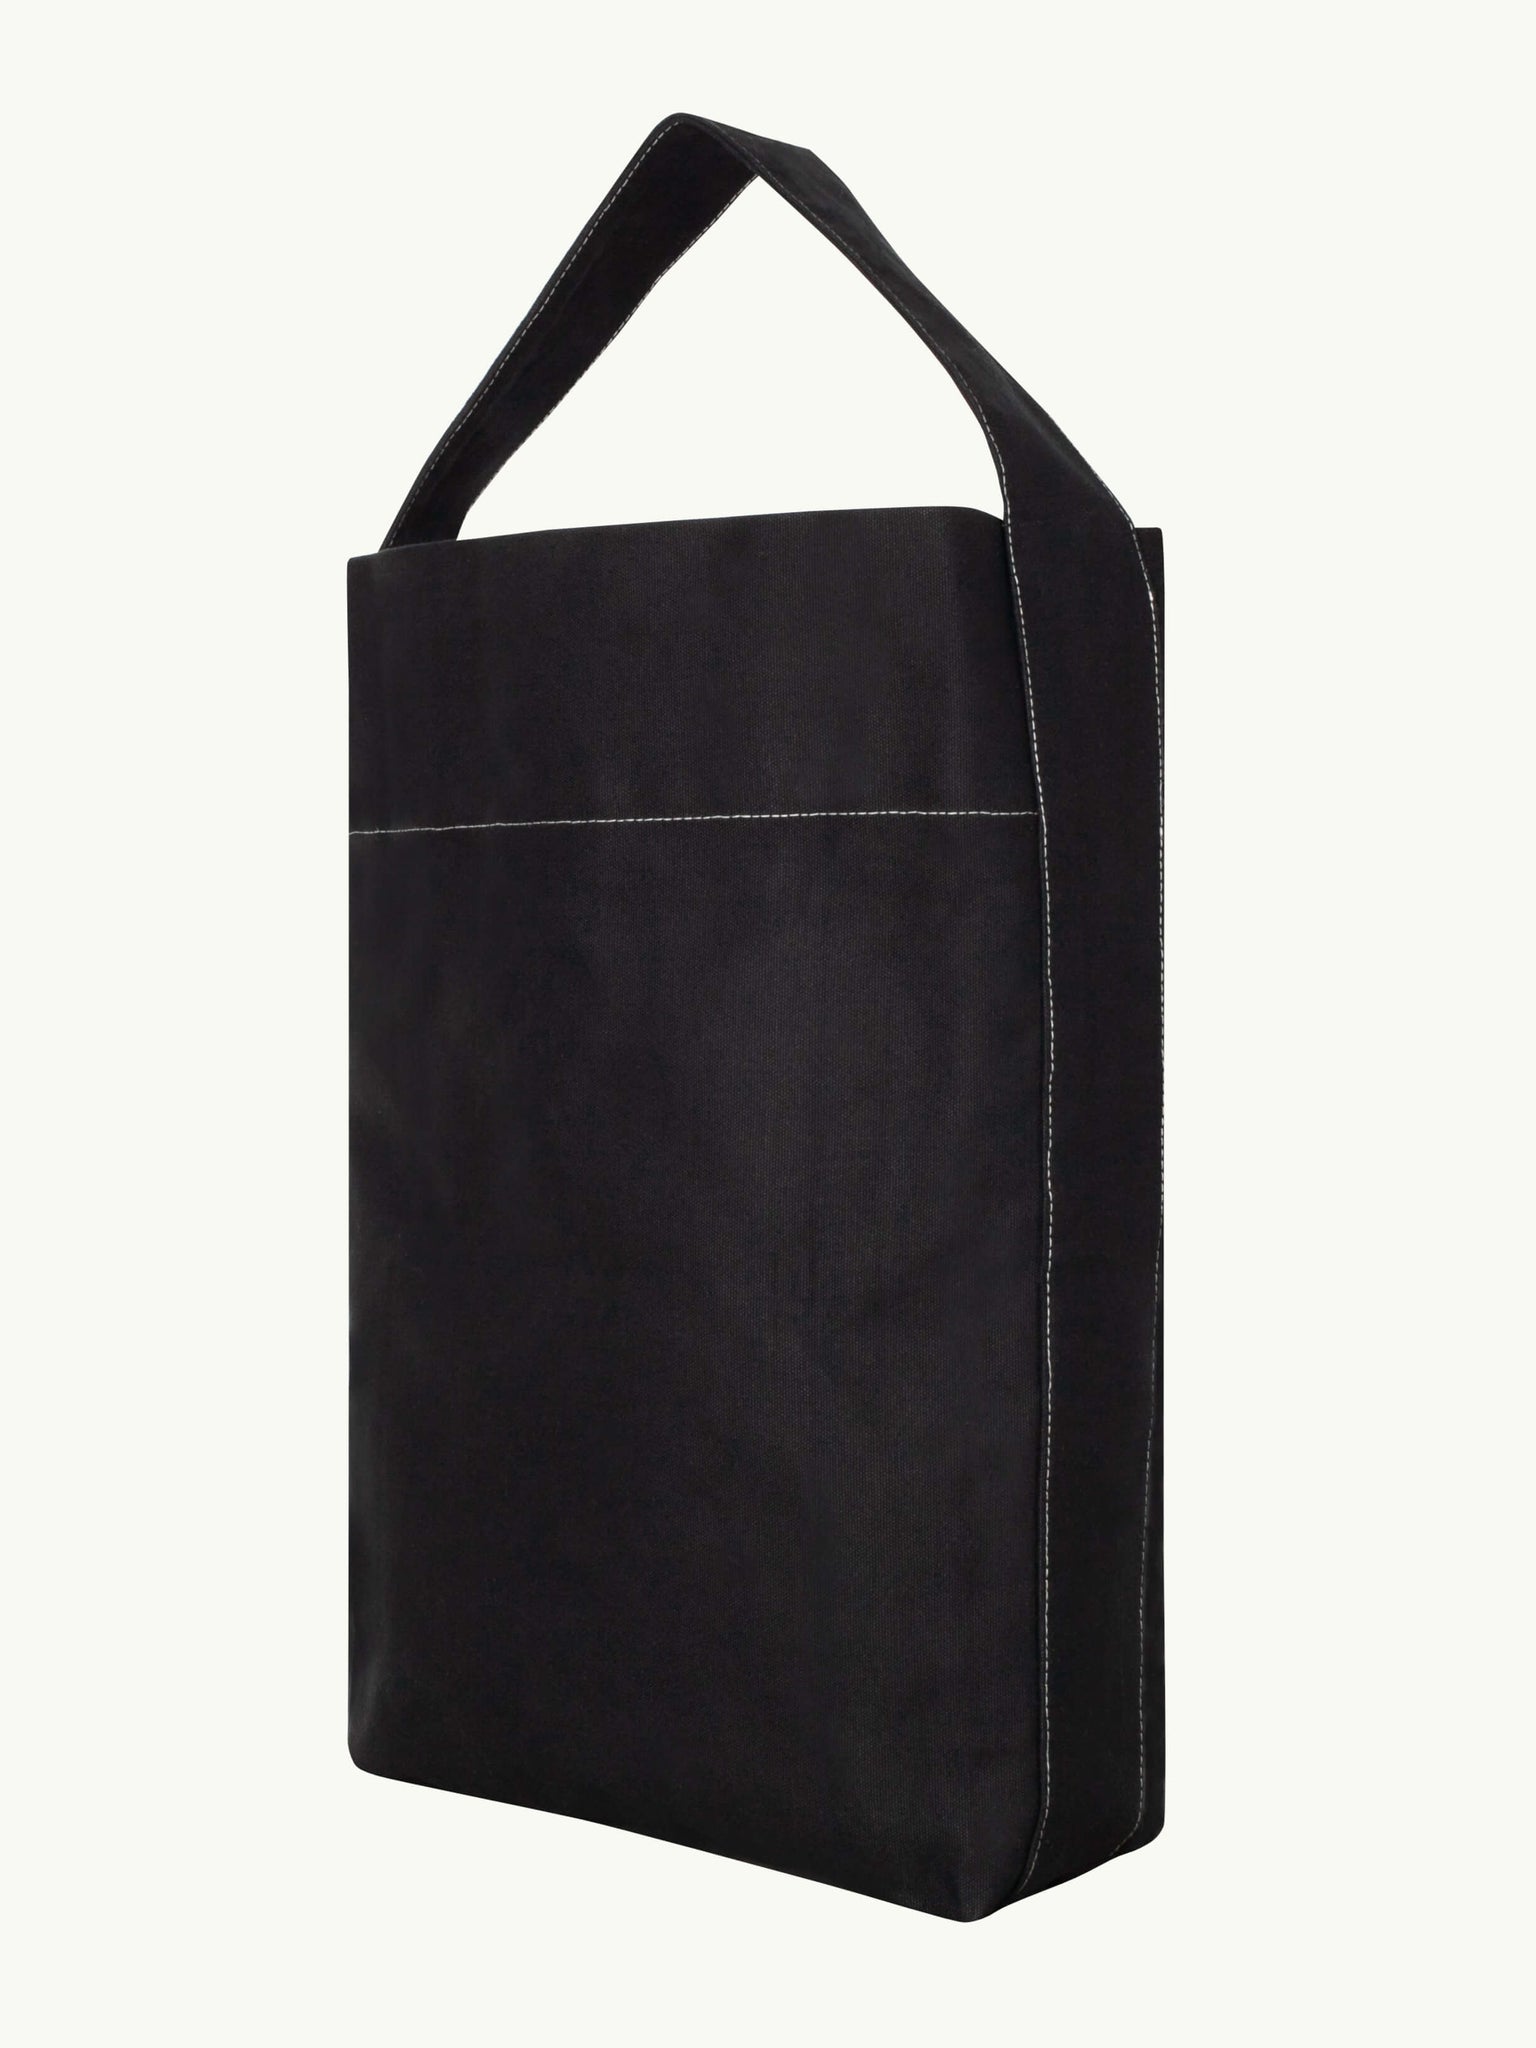 Bucket Tote in Black with Contrast Stitching